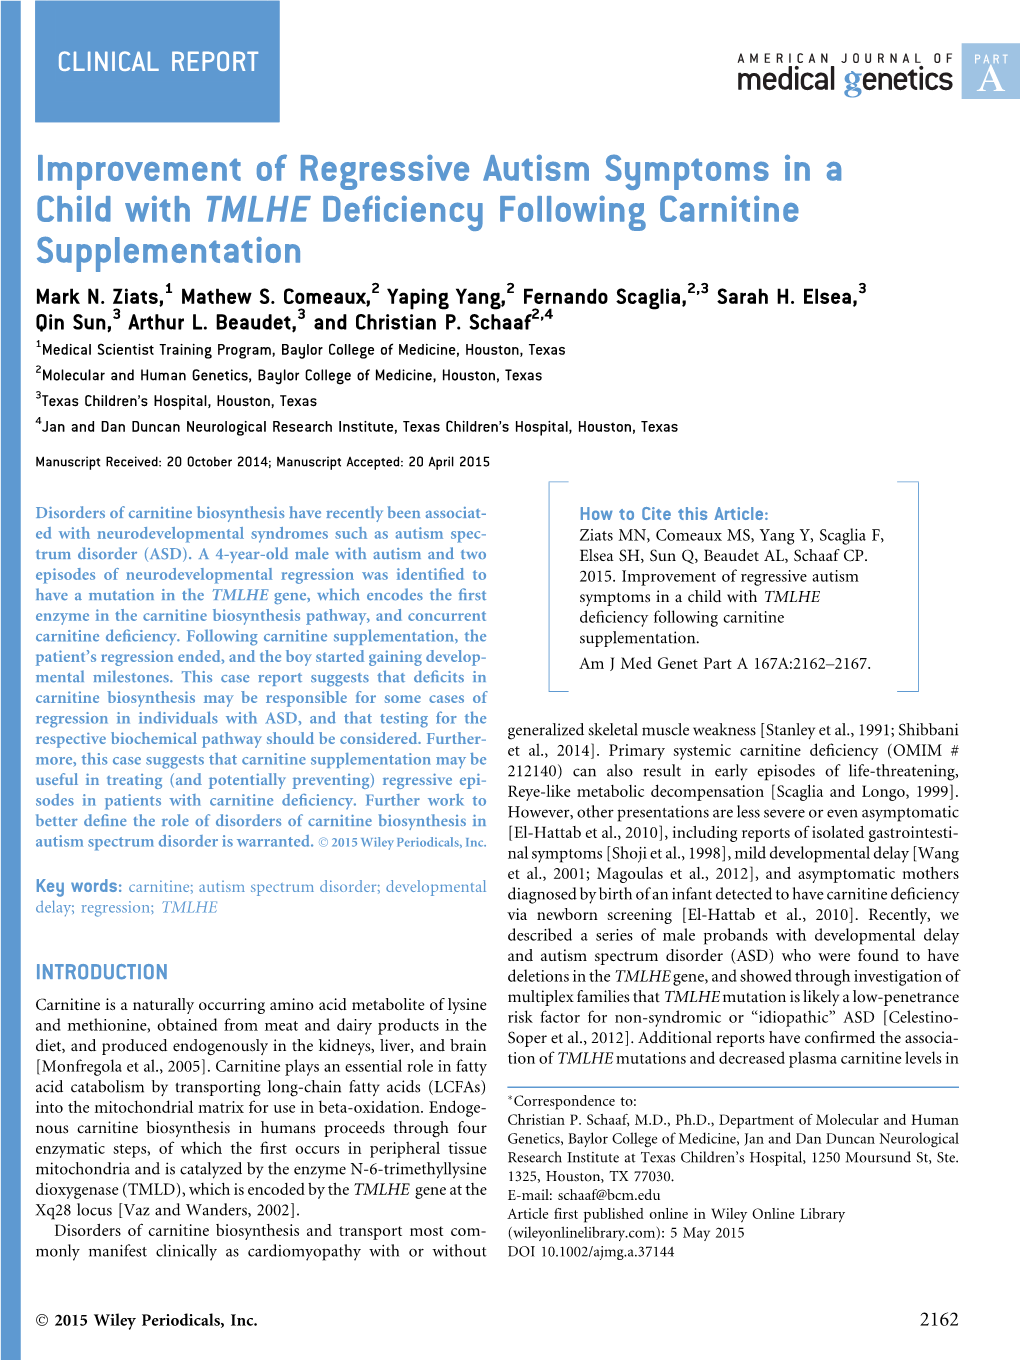 Improvement of Regressive Autism Symptoms in a Child with TMLHE Deficiency Following Carnitine Supplementation